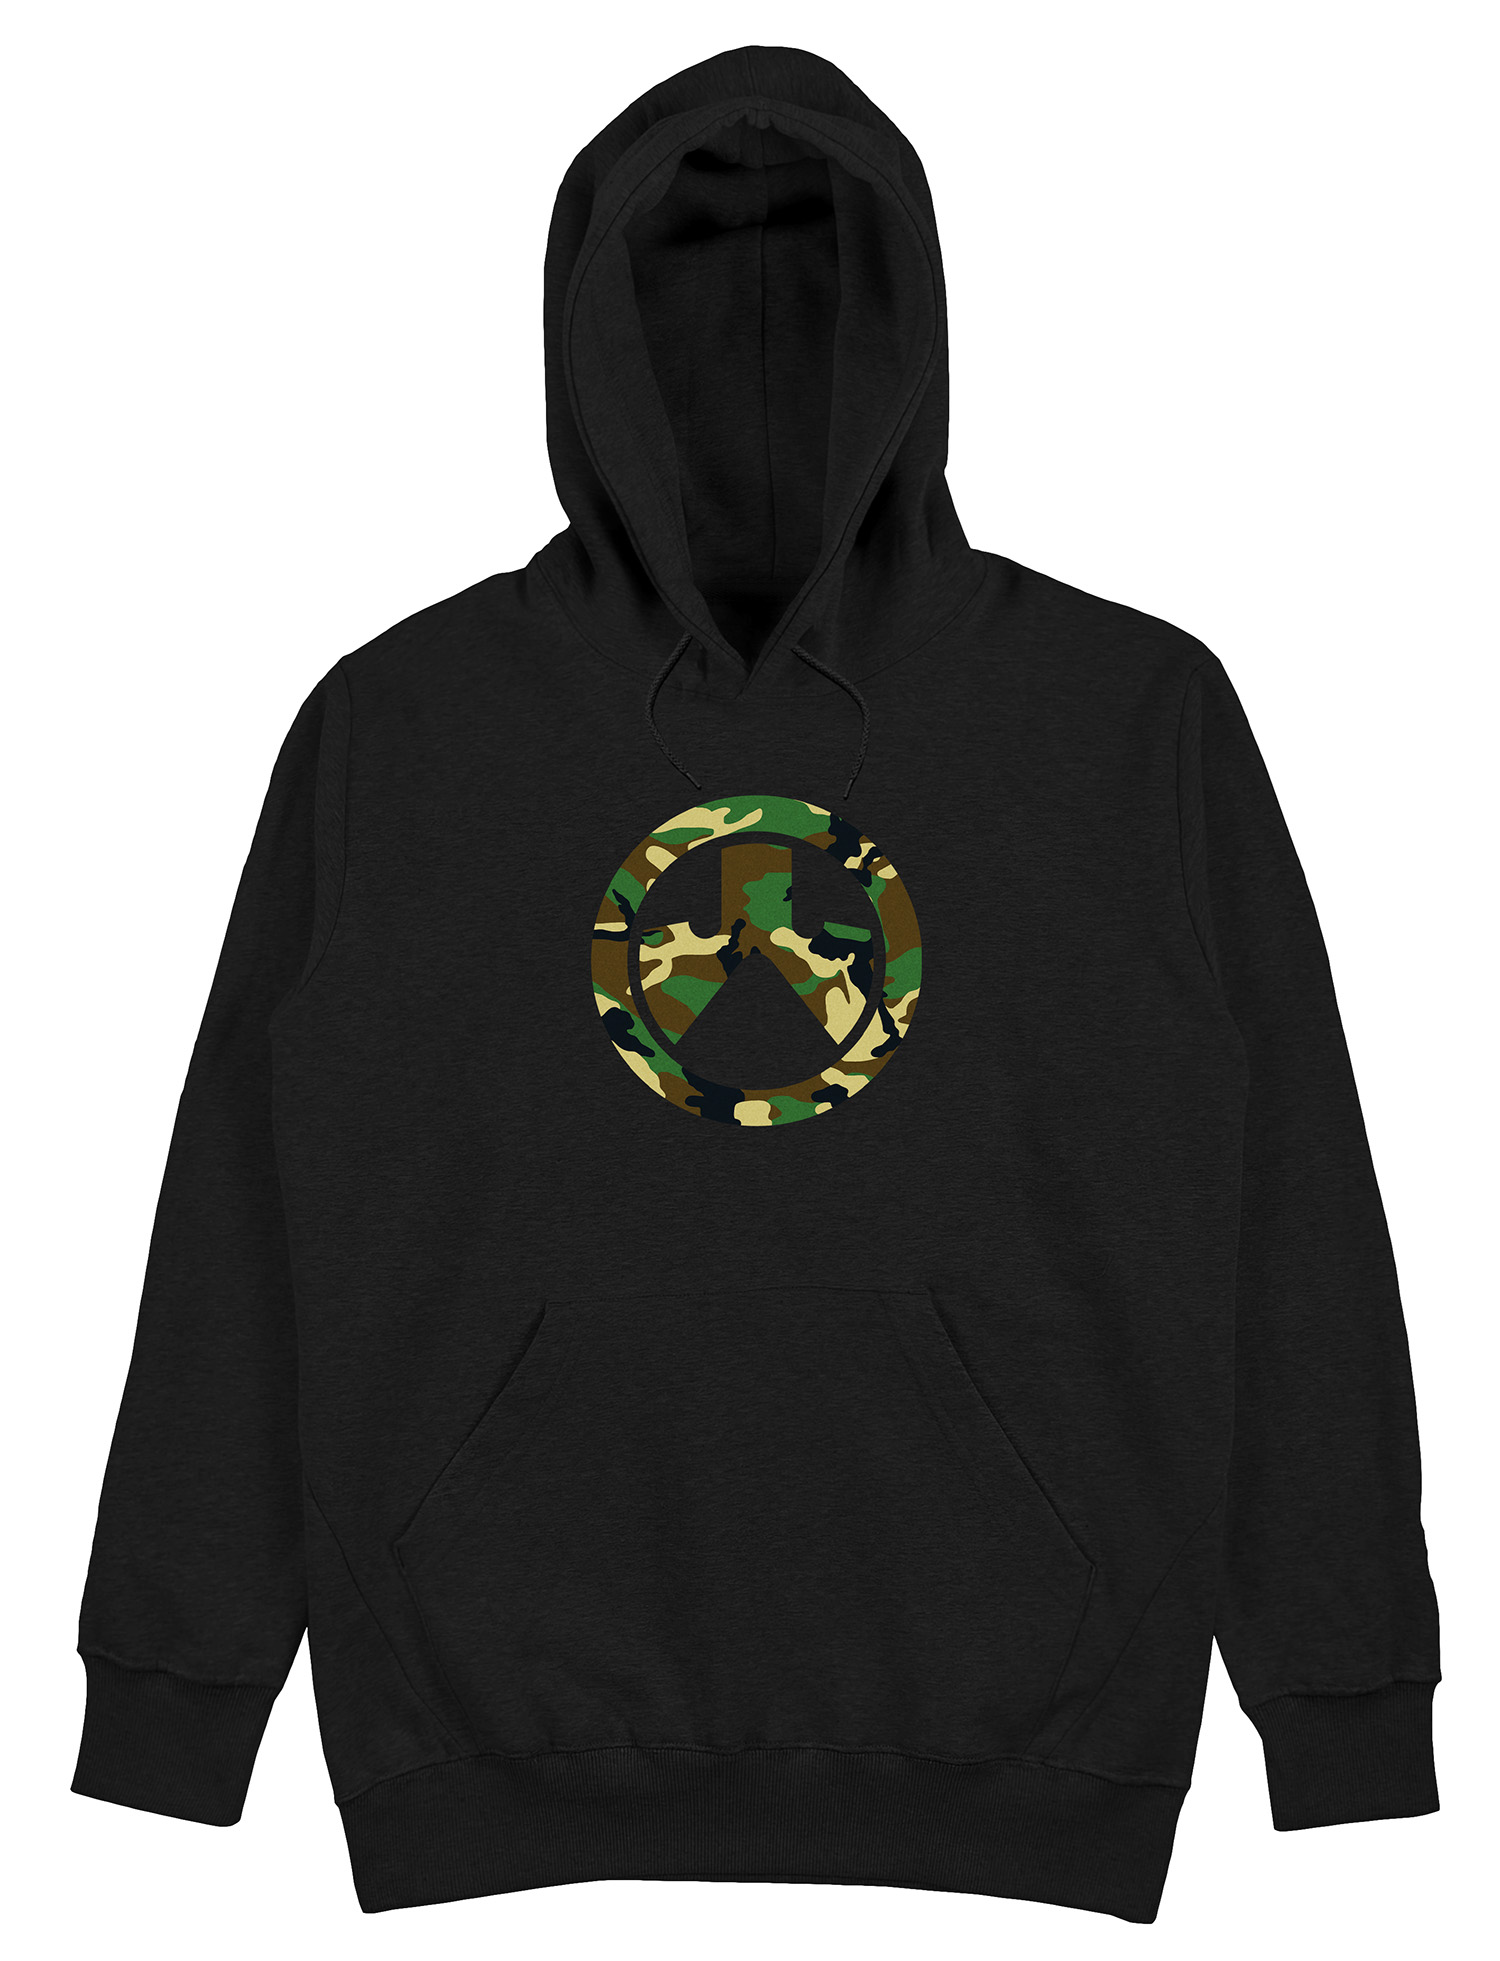 MAGPUL WOODLAND ICON HOODIE BLK MD